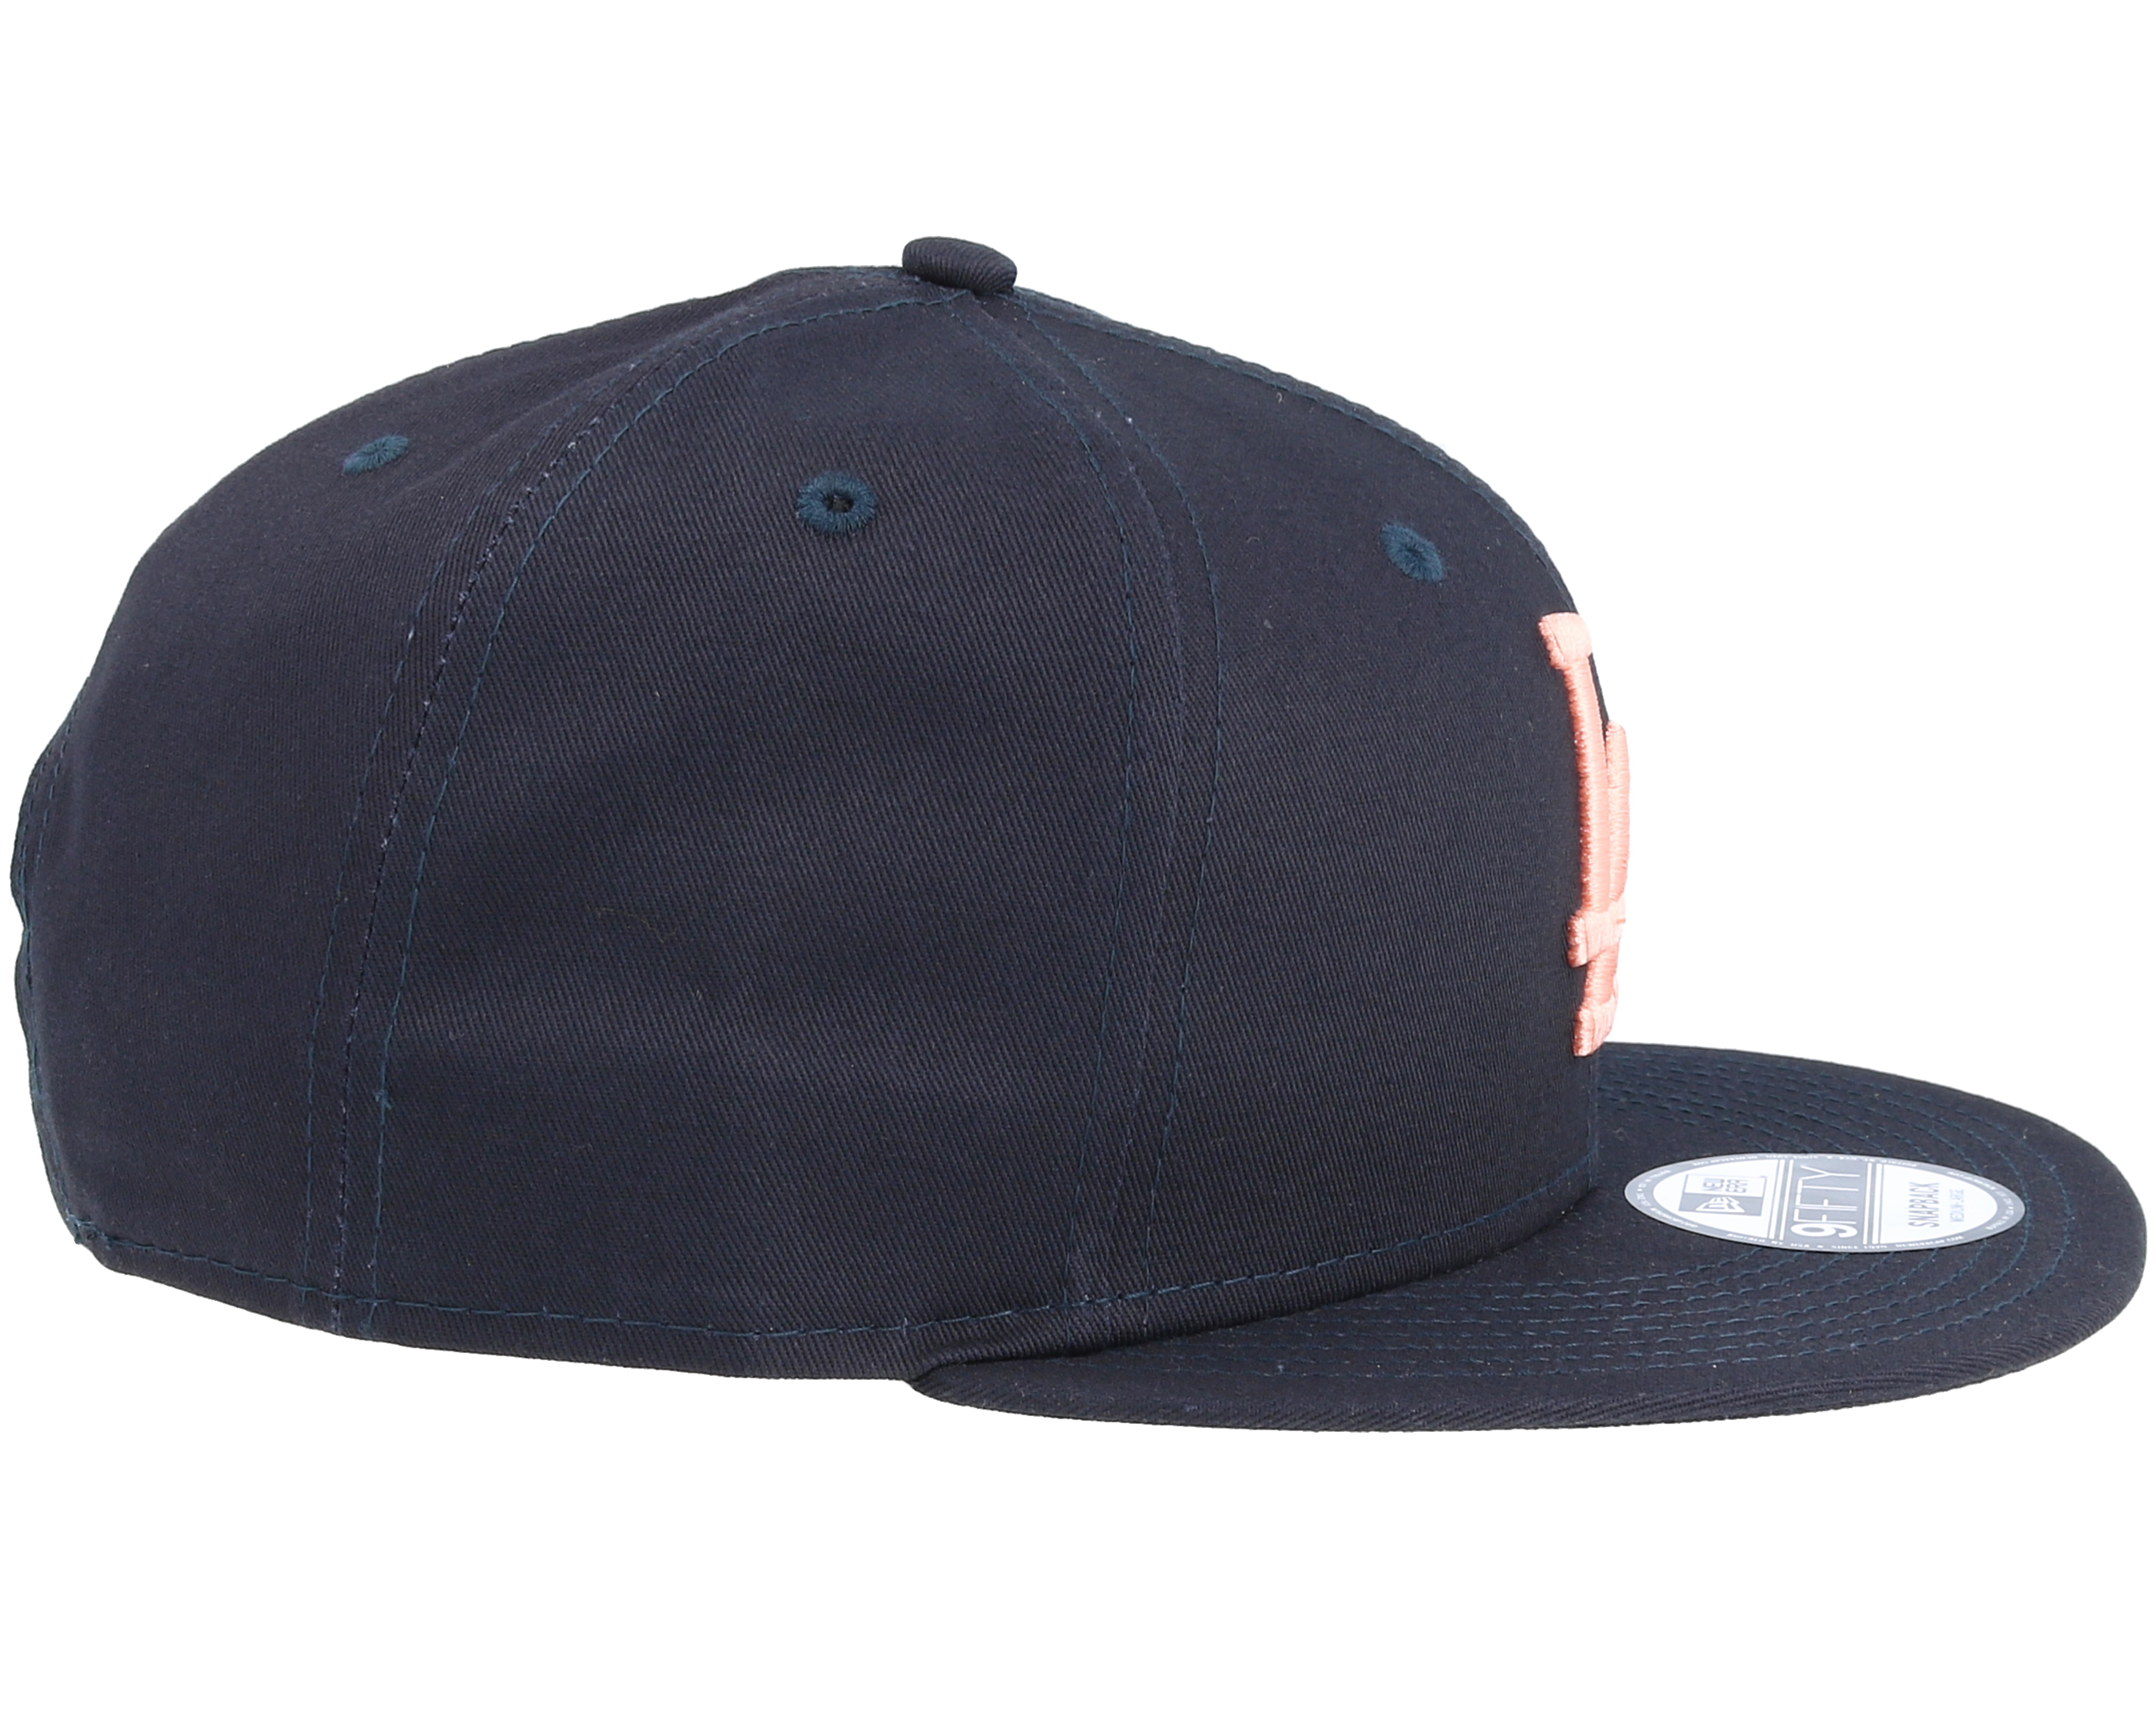 Los Angeles Dodgers League Essential 9Fifty Navy/Peach Snapback - New ...